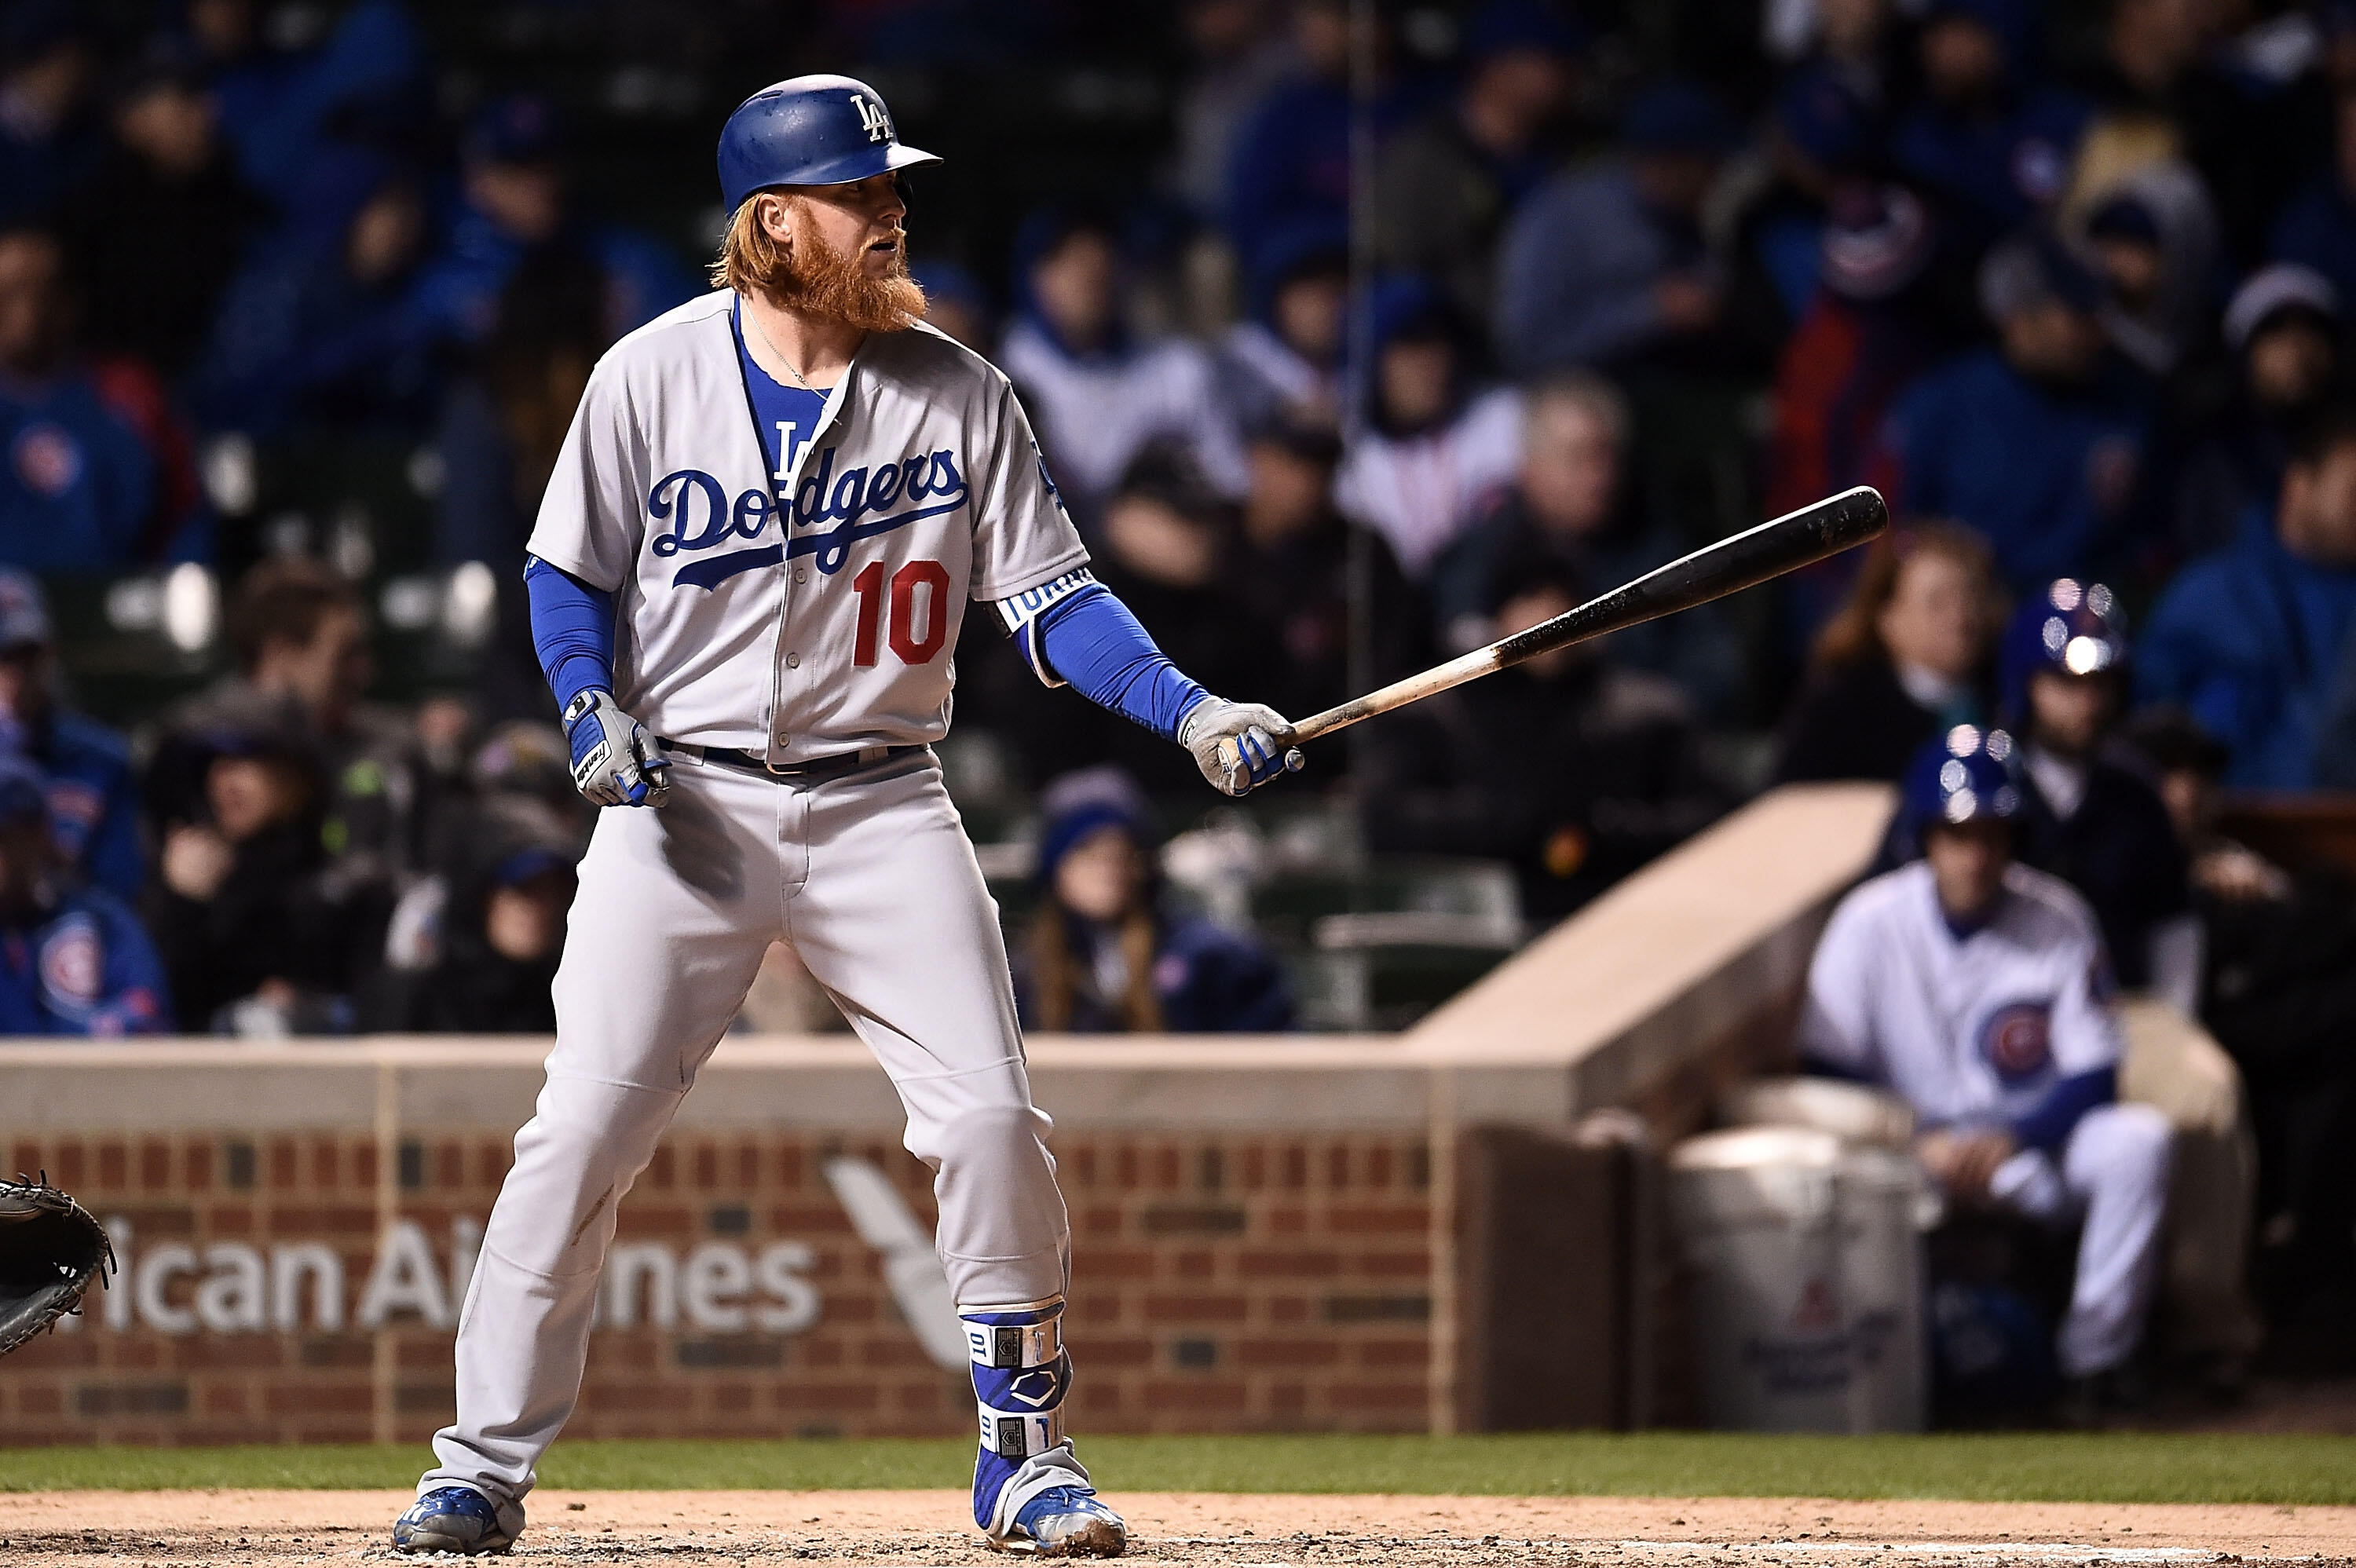 CHICAGO, IL - APRIL 10:  Justin Turner #10 of the Los Angeles Dodgers waits for a pitch during the fourth inning of a game against the Chicago Cubs at Wrigley Field on April 10, 2017 in Chicago, Illinois.  (Photo by Stacy Revere/Getty Images)